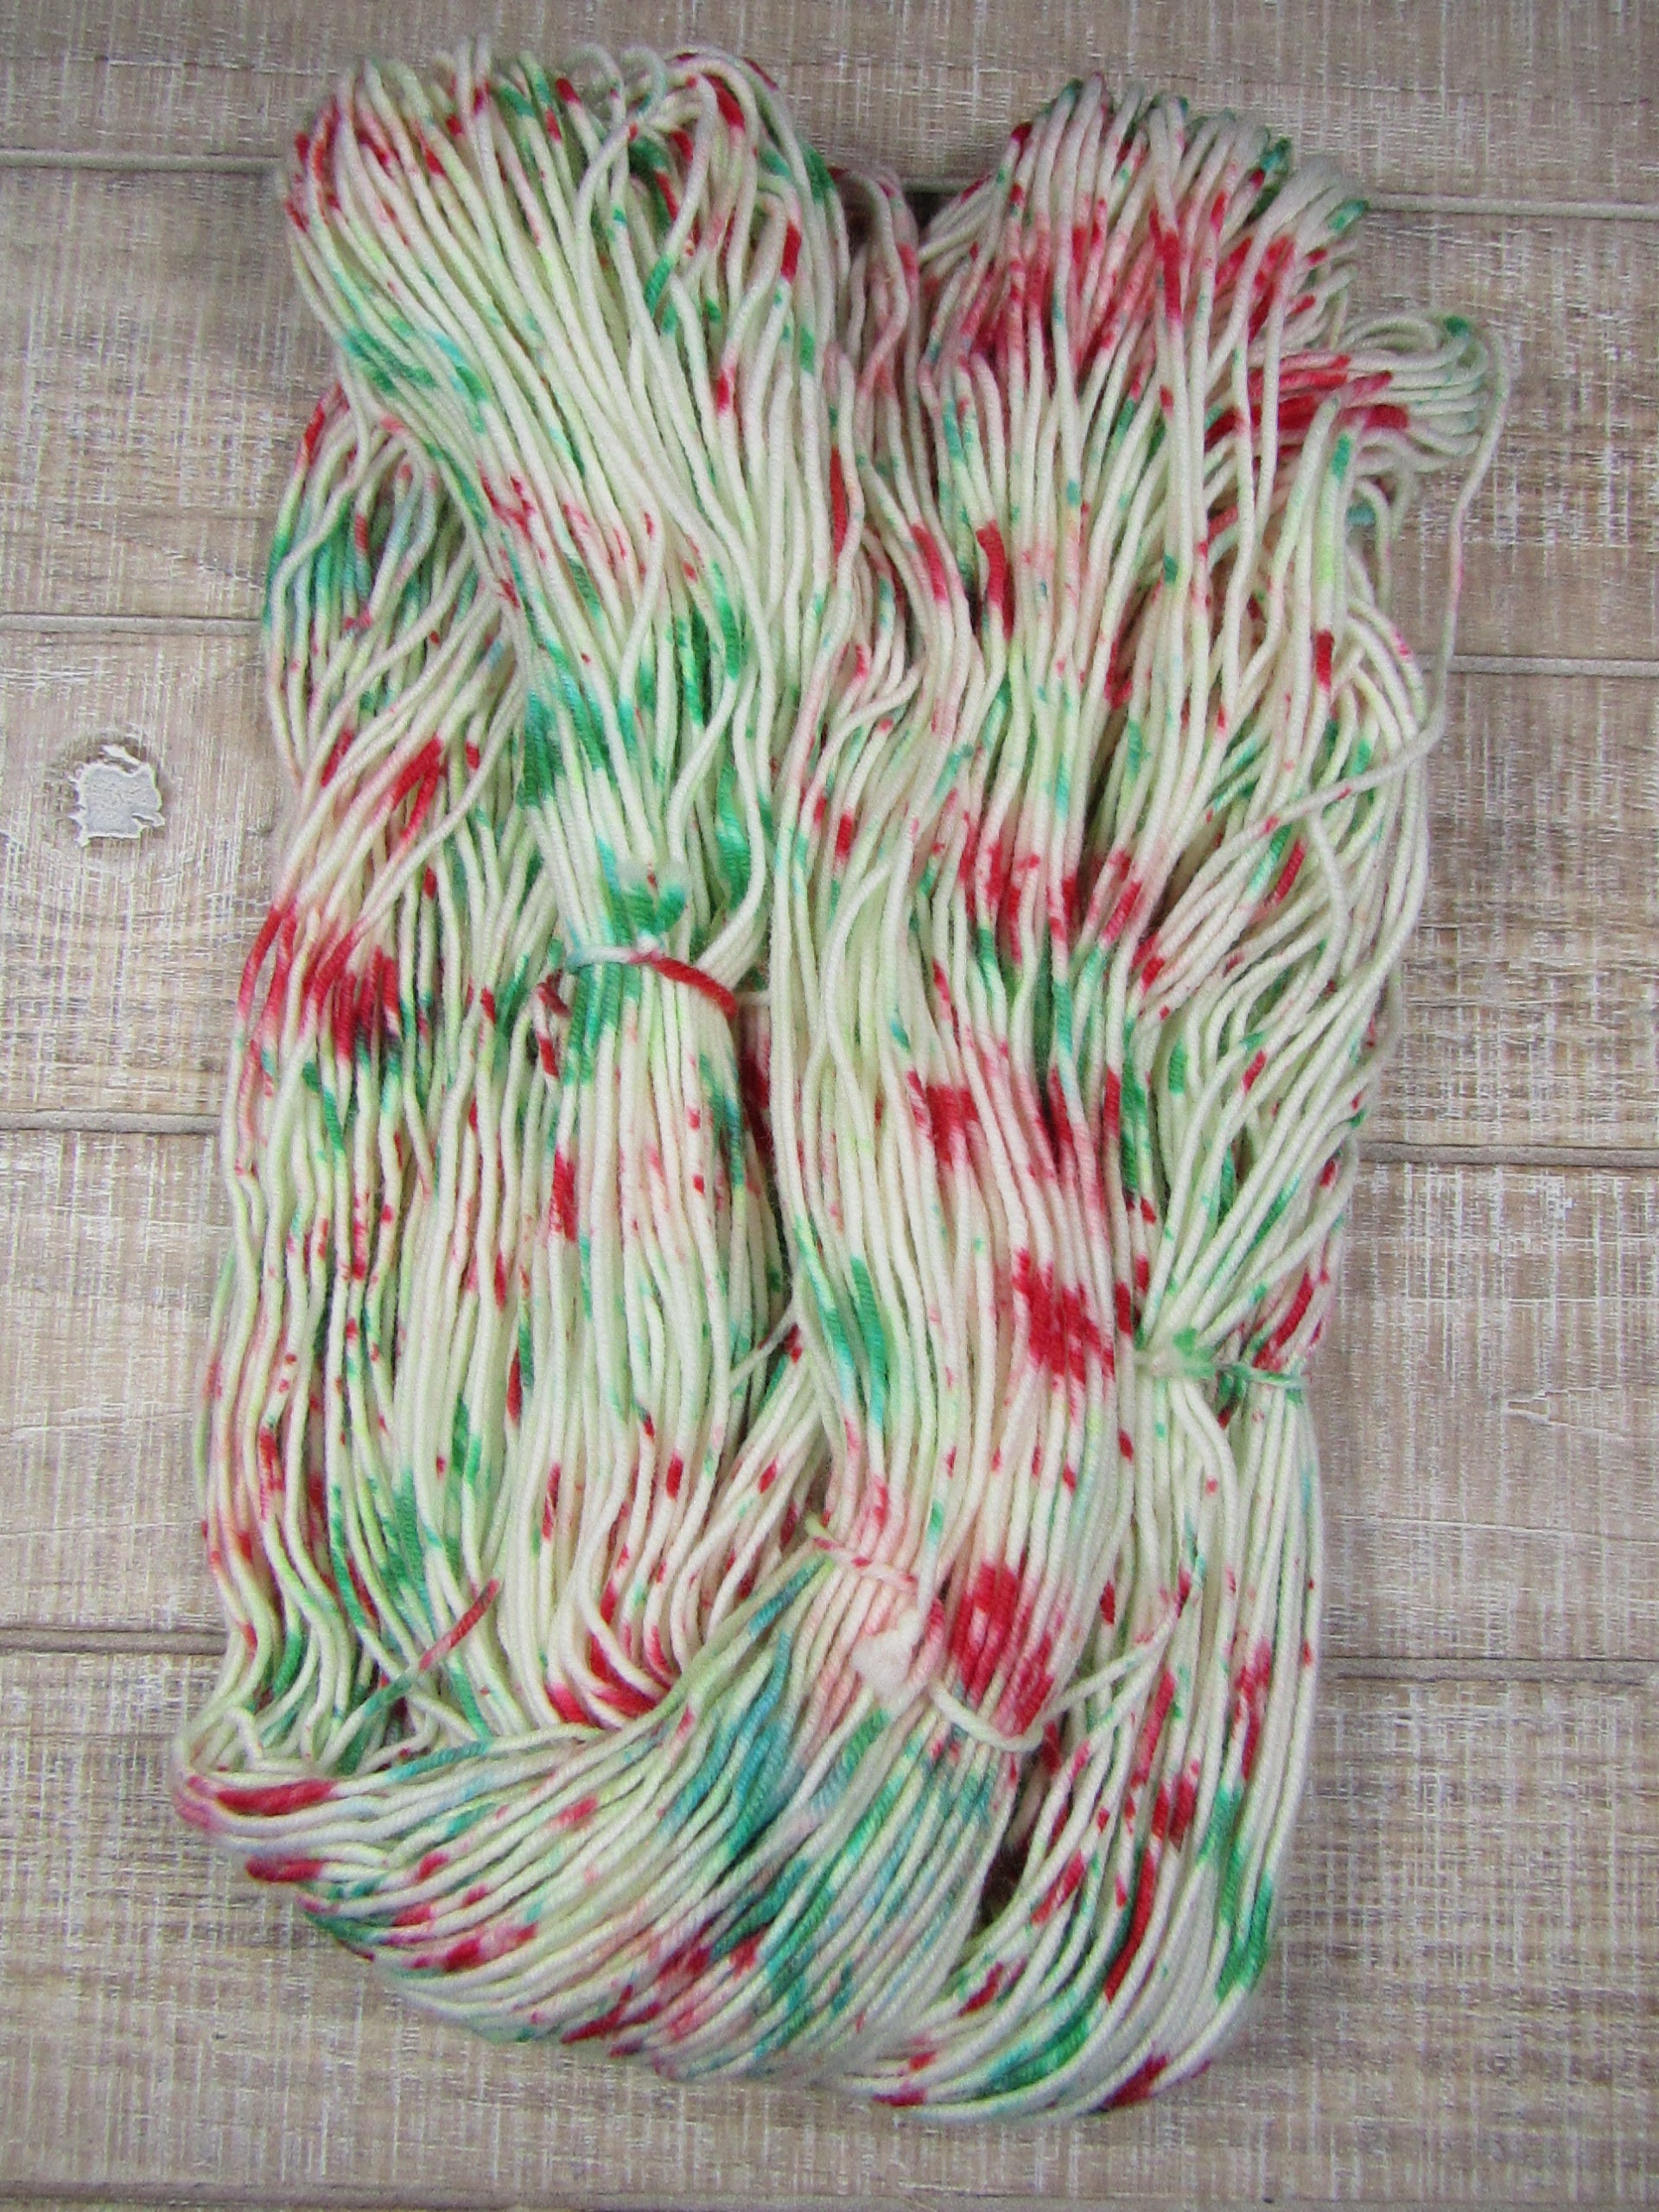 Hand-dyed yarn - Candy Cane Merino/Cashstyle nylon worsted weight yarn with green and red speckles.